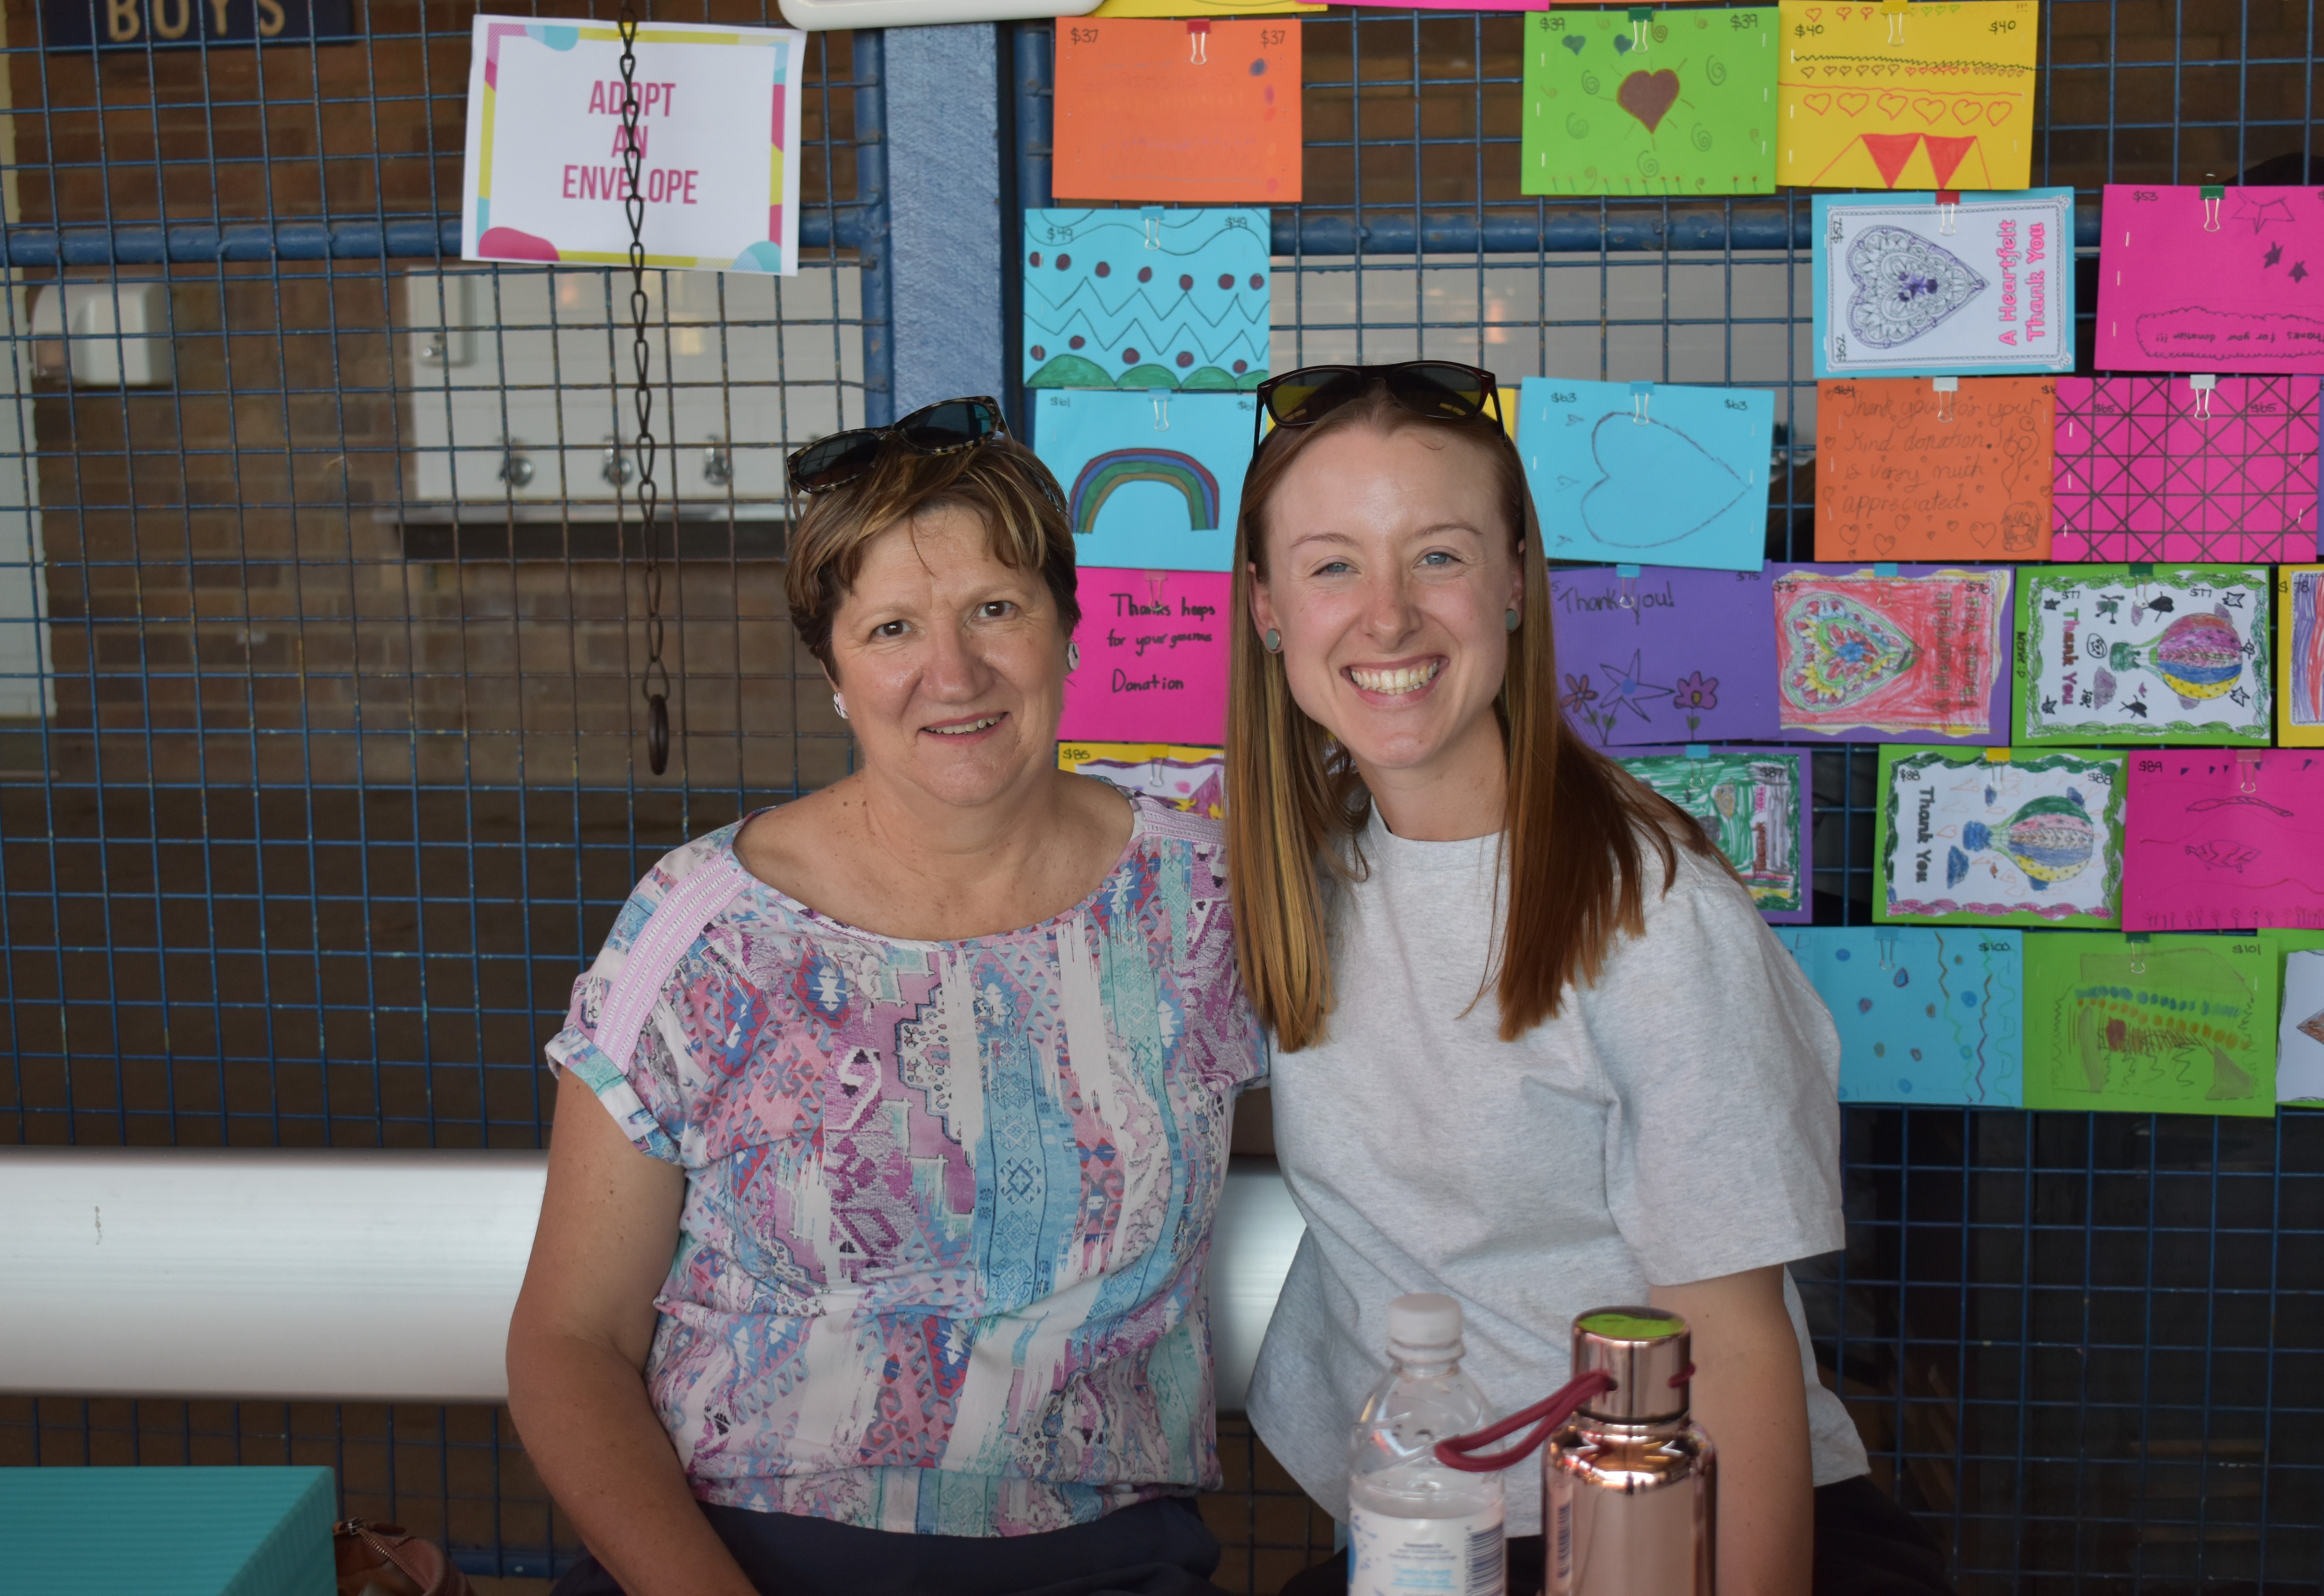 At the ‘Adopt an Envelope’ stall: Gail Knight and Lorna Gleeson.